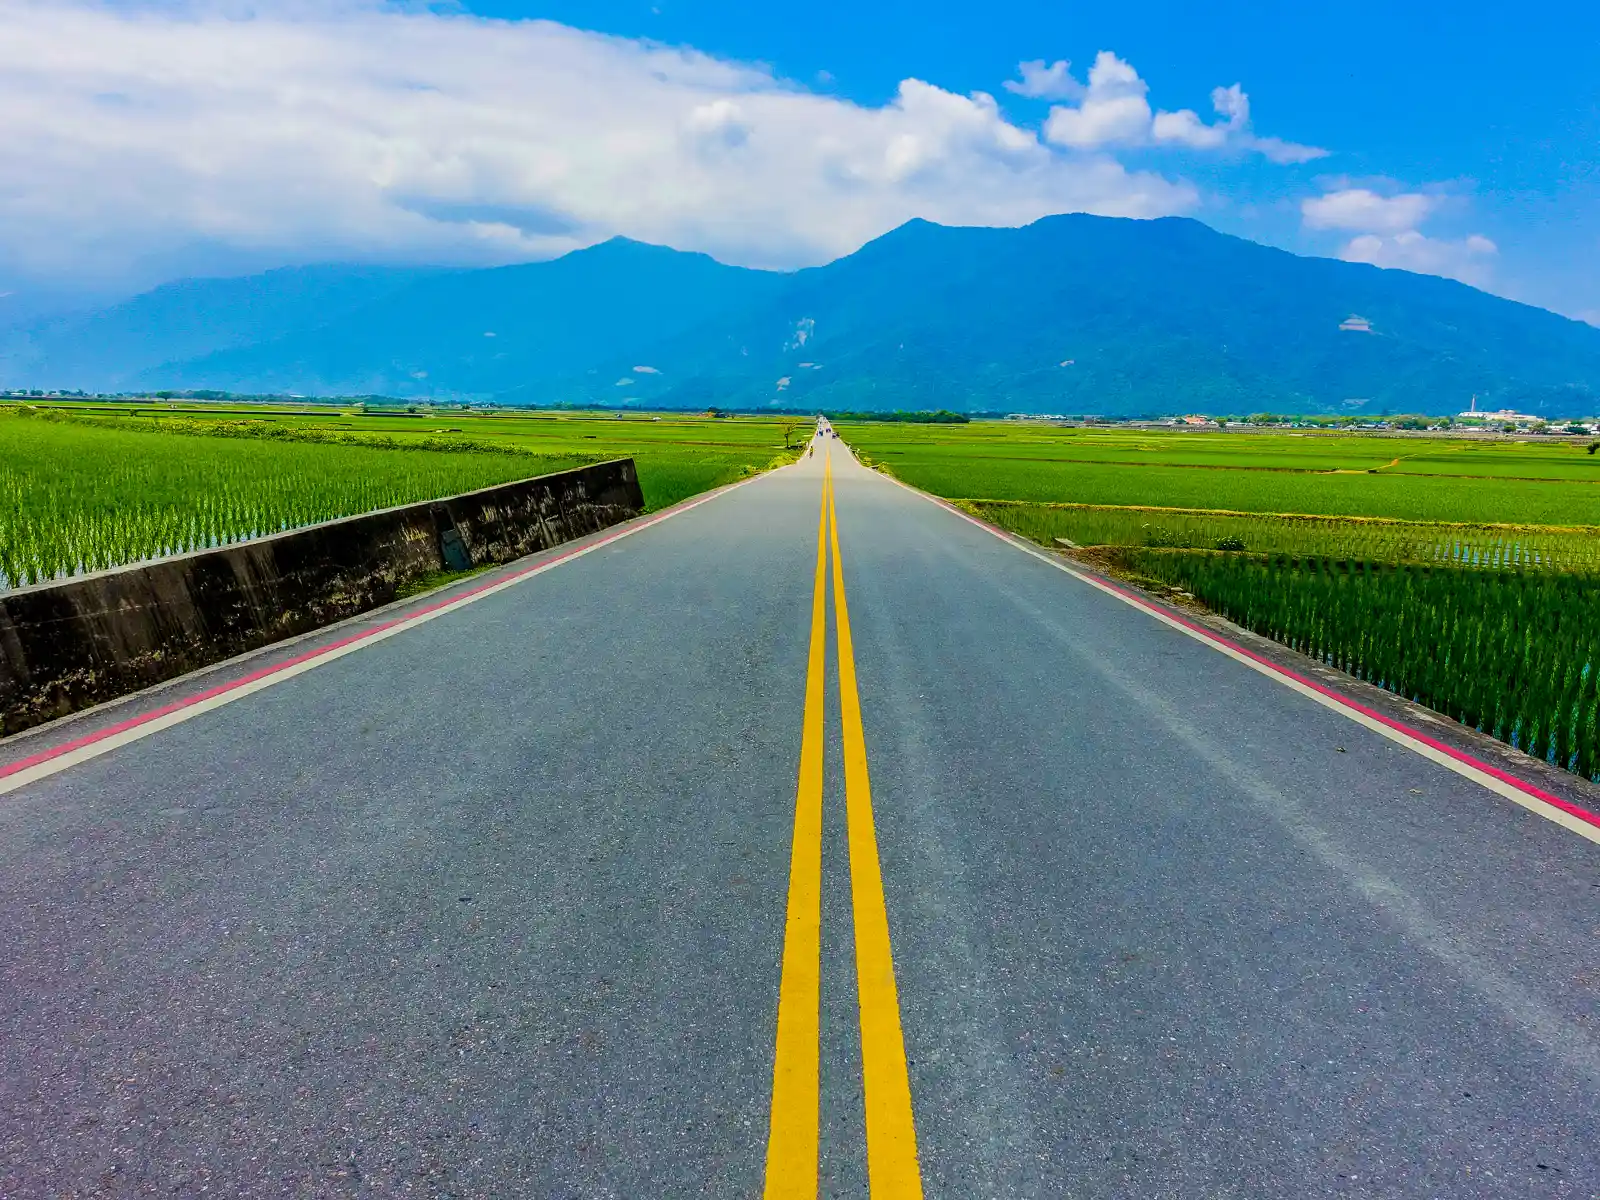 A perfectly straight road leads directly across a valley filled with rice fields.